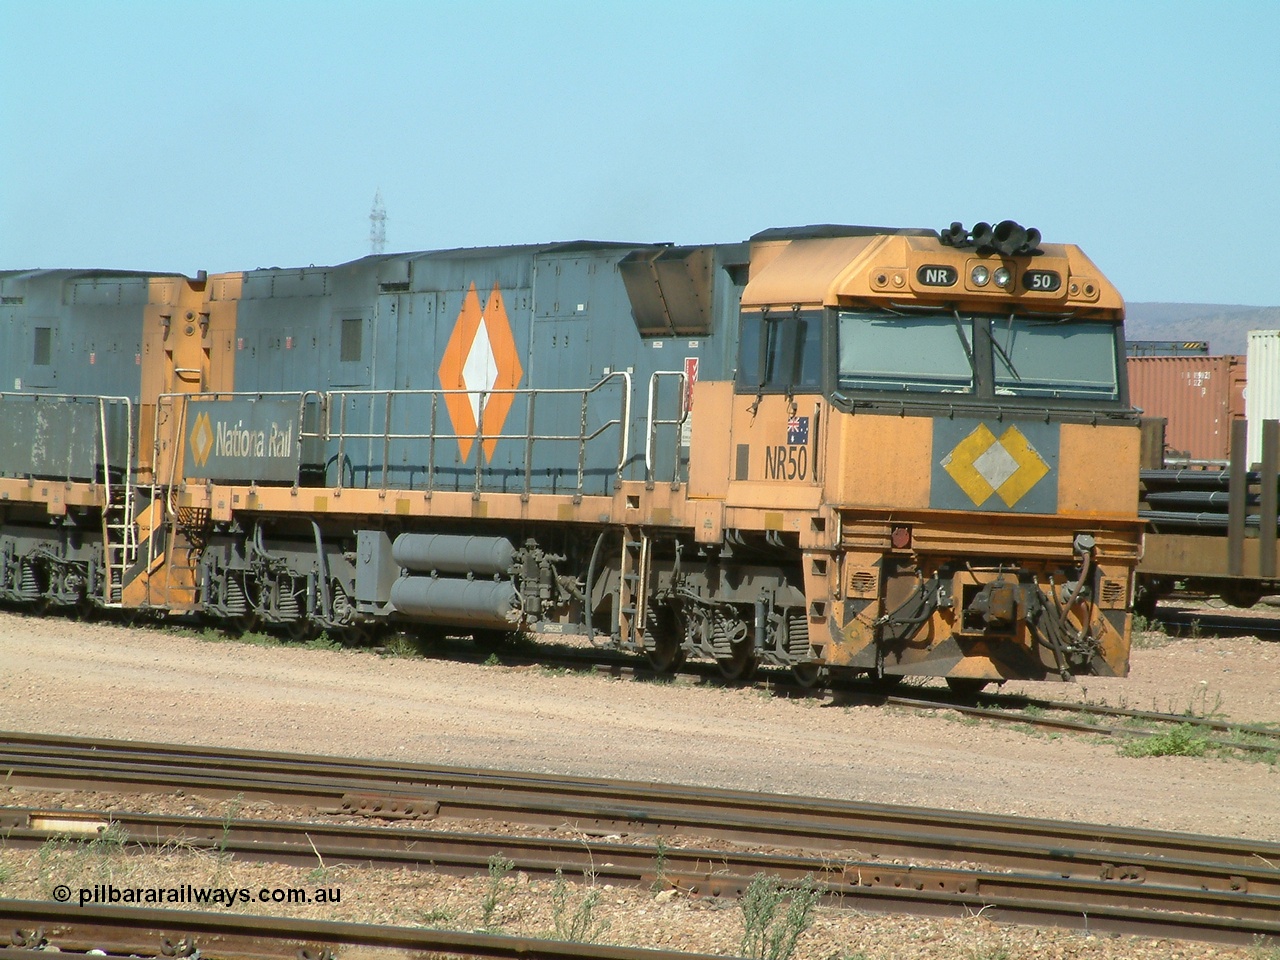 030404 103712
Port Augusta Spencer Junction yard, National Rail Goninan built GE Cv40-9i model NR class unit NR 50 serial 7250-08 / 97-252 lay about the yard in between jobs. 4th April 2003.
Keywords: NR-class;NR50;Goninan;GE;Cv40-9i;7250-08/97-252;